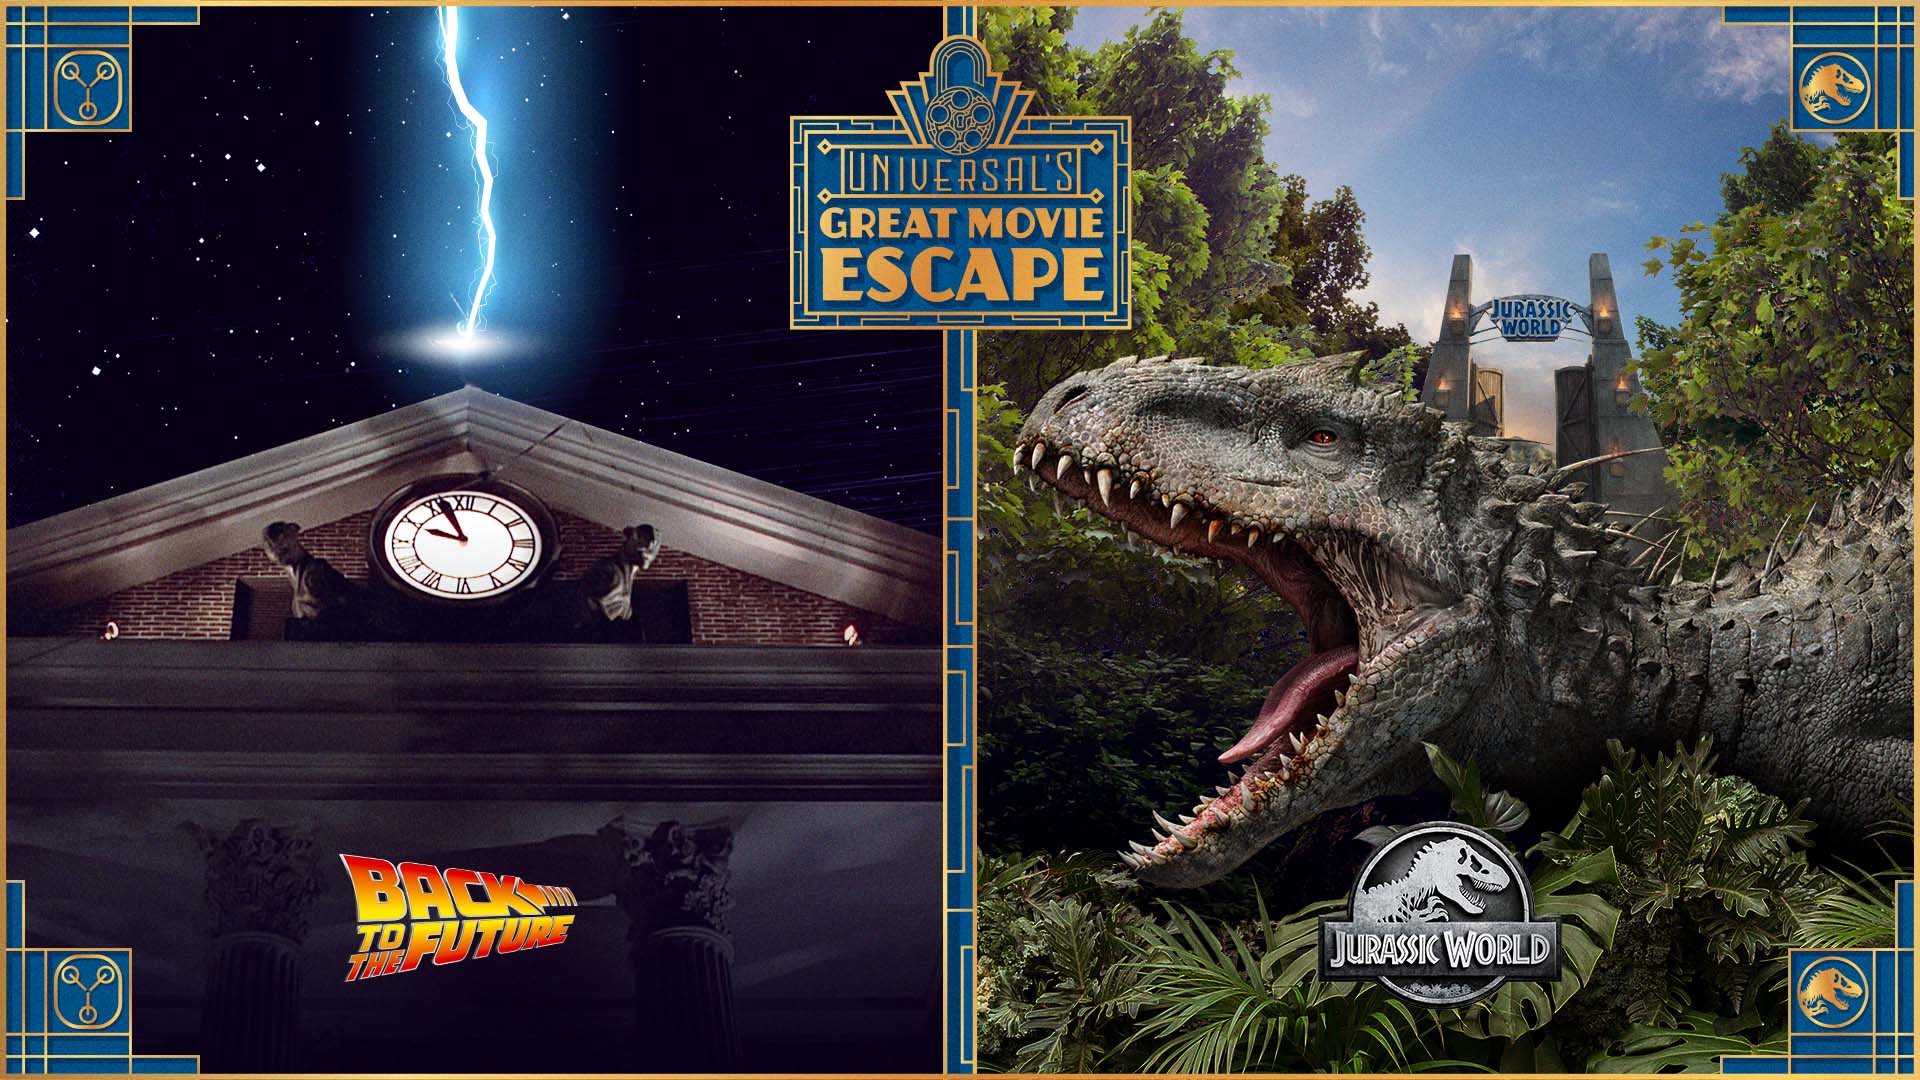 Universal’s Great Movie Escape Room coming to Universal Orlando | Chip ...